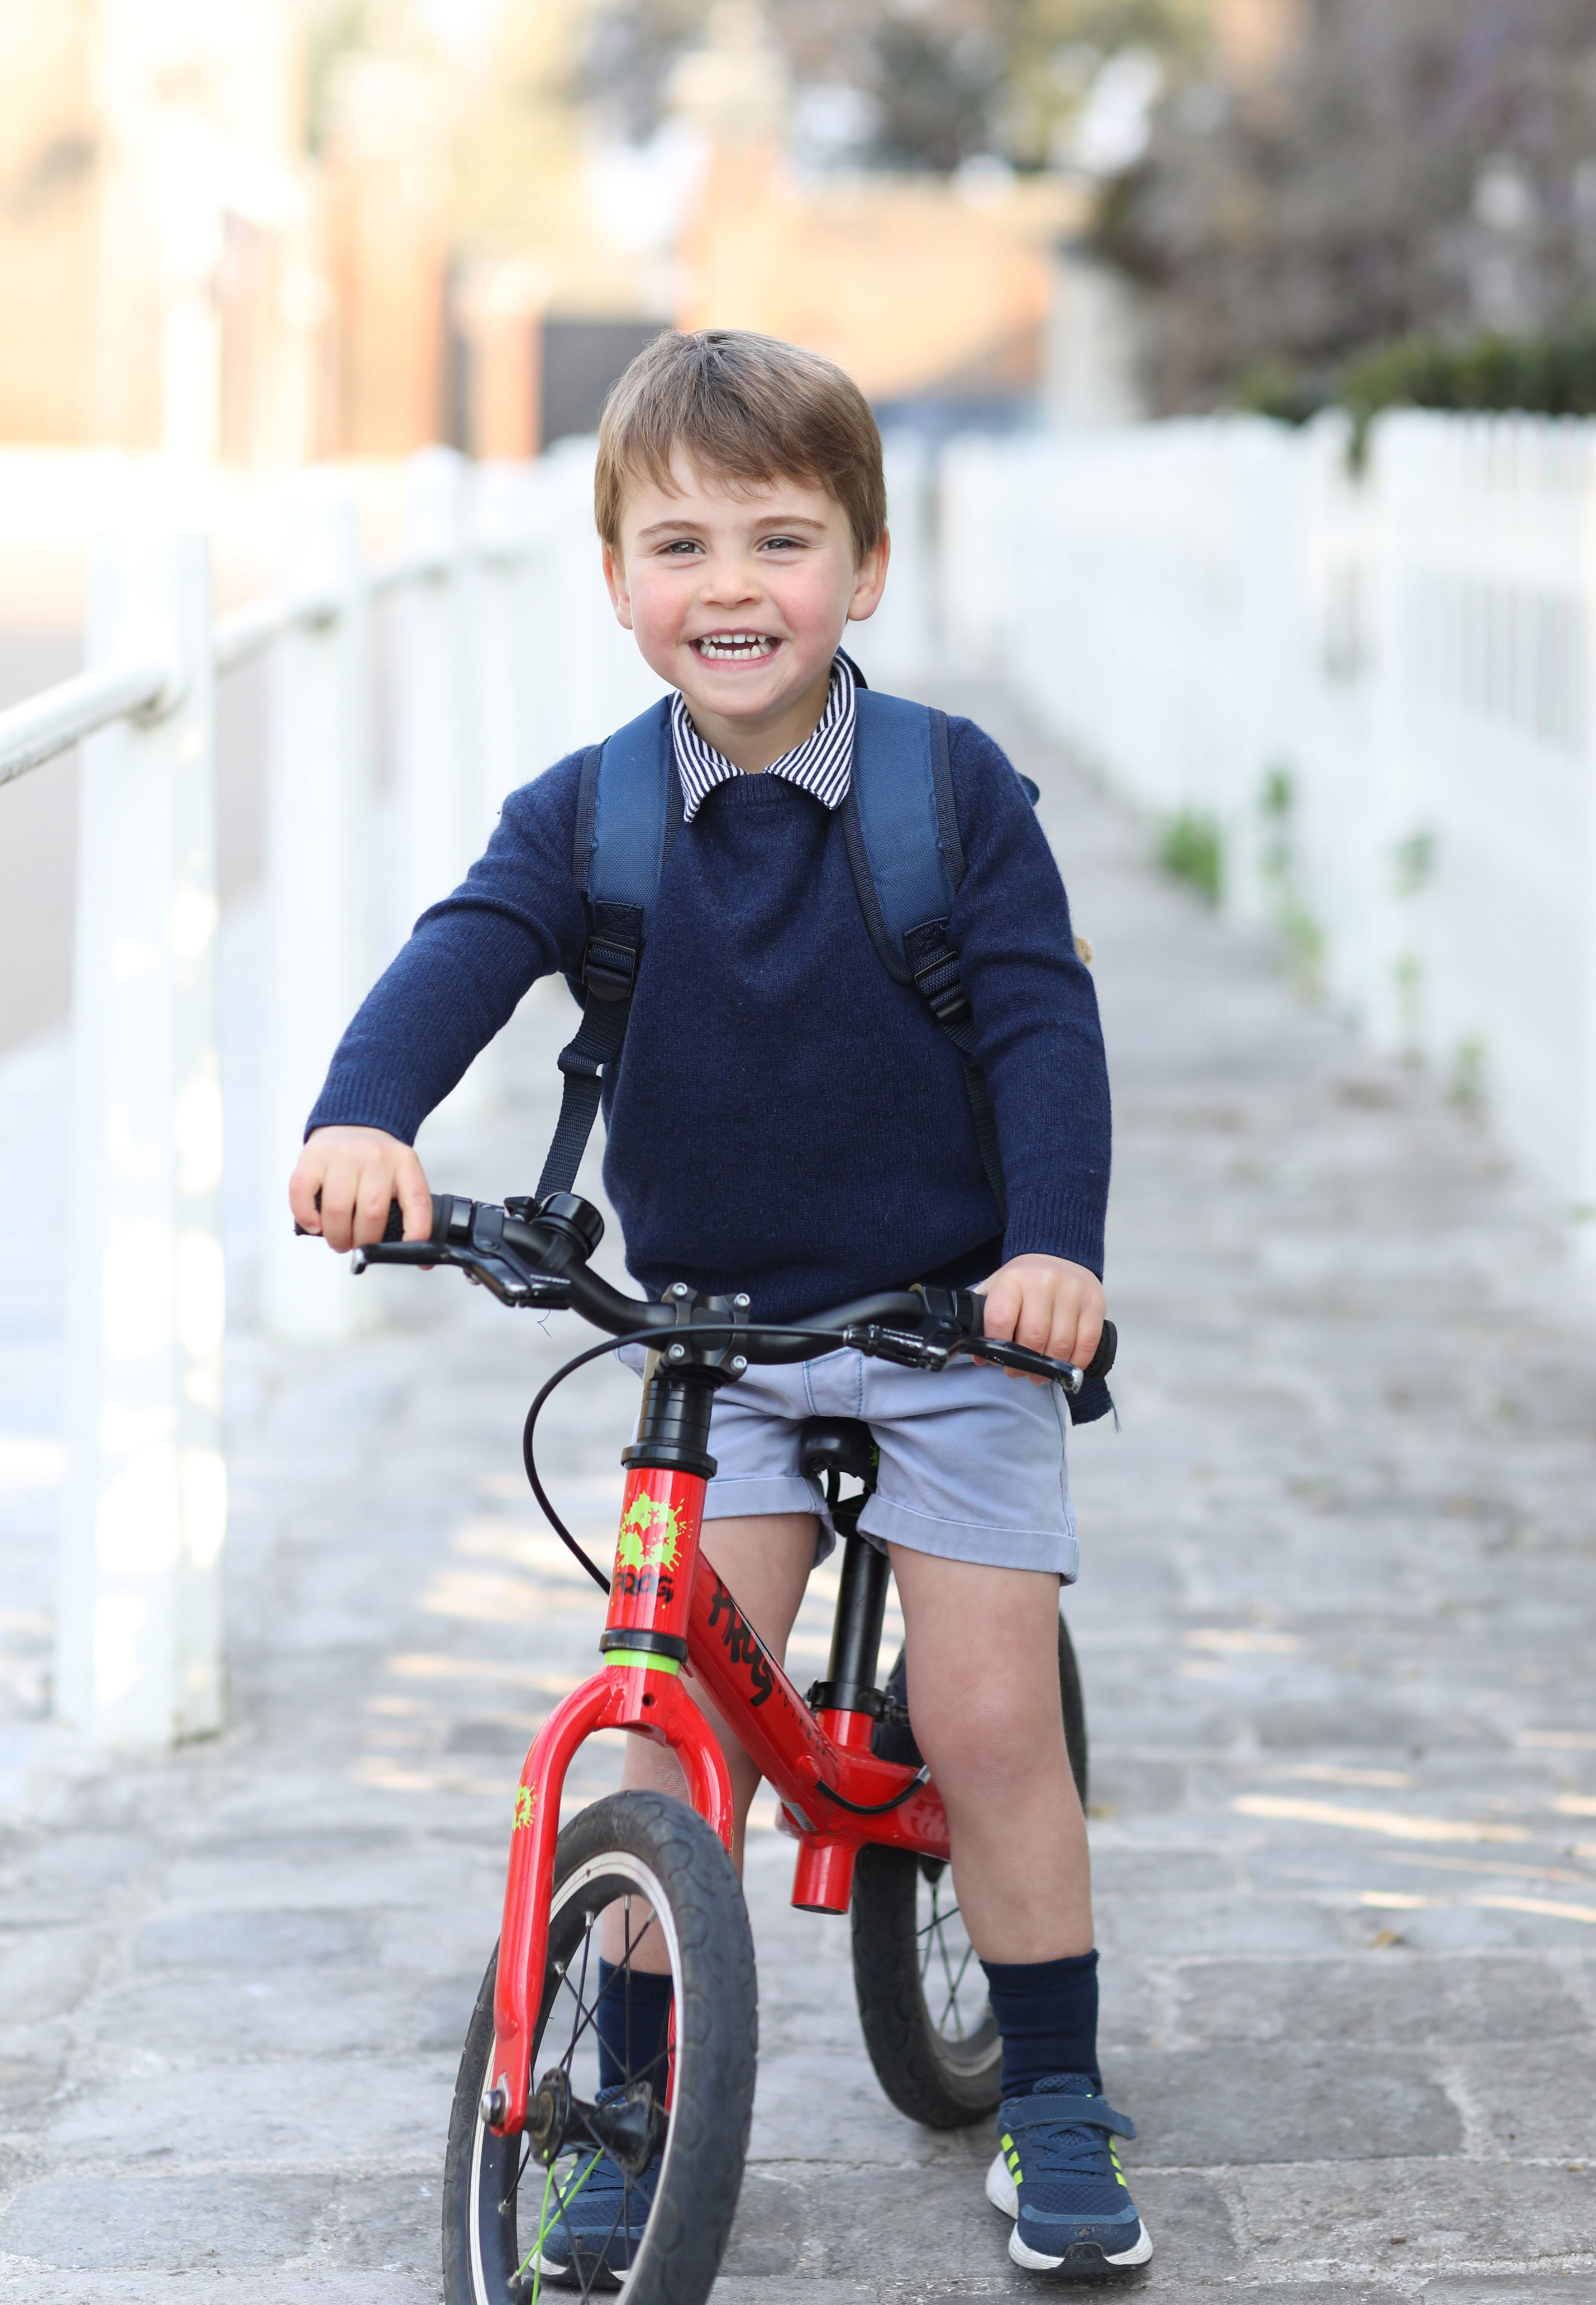 <p>Mom <a href="https://www.wonderwall.com/celebrity/profiles/overview/duchess-kate-1356.article">Duchess Kate</a> took this pic of her youngest son, Prince Louis, on his bike as he left for his first day at the Willcocks Nursery School during his birthday week, Kensington Palace shared. He turned 3 on April 23, 2021.</p>